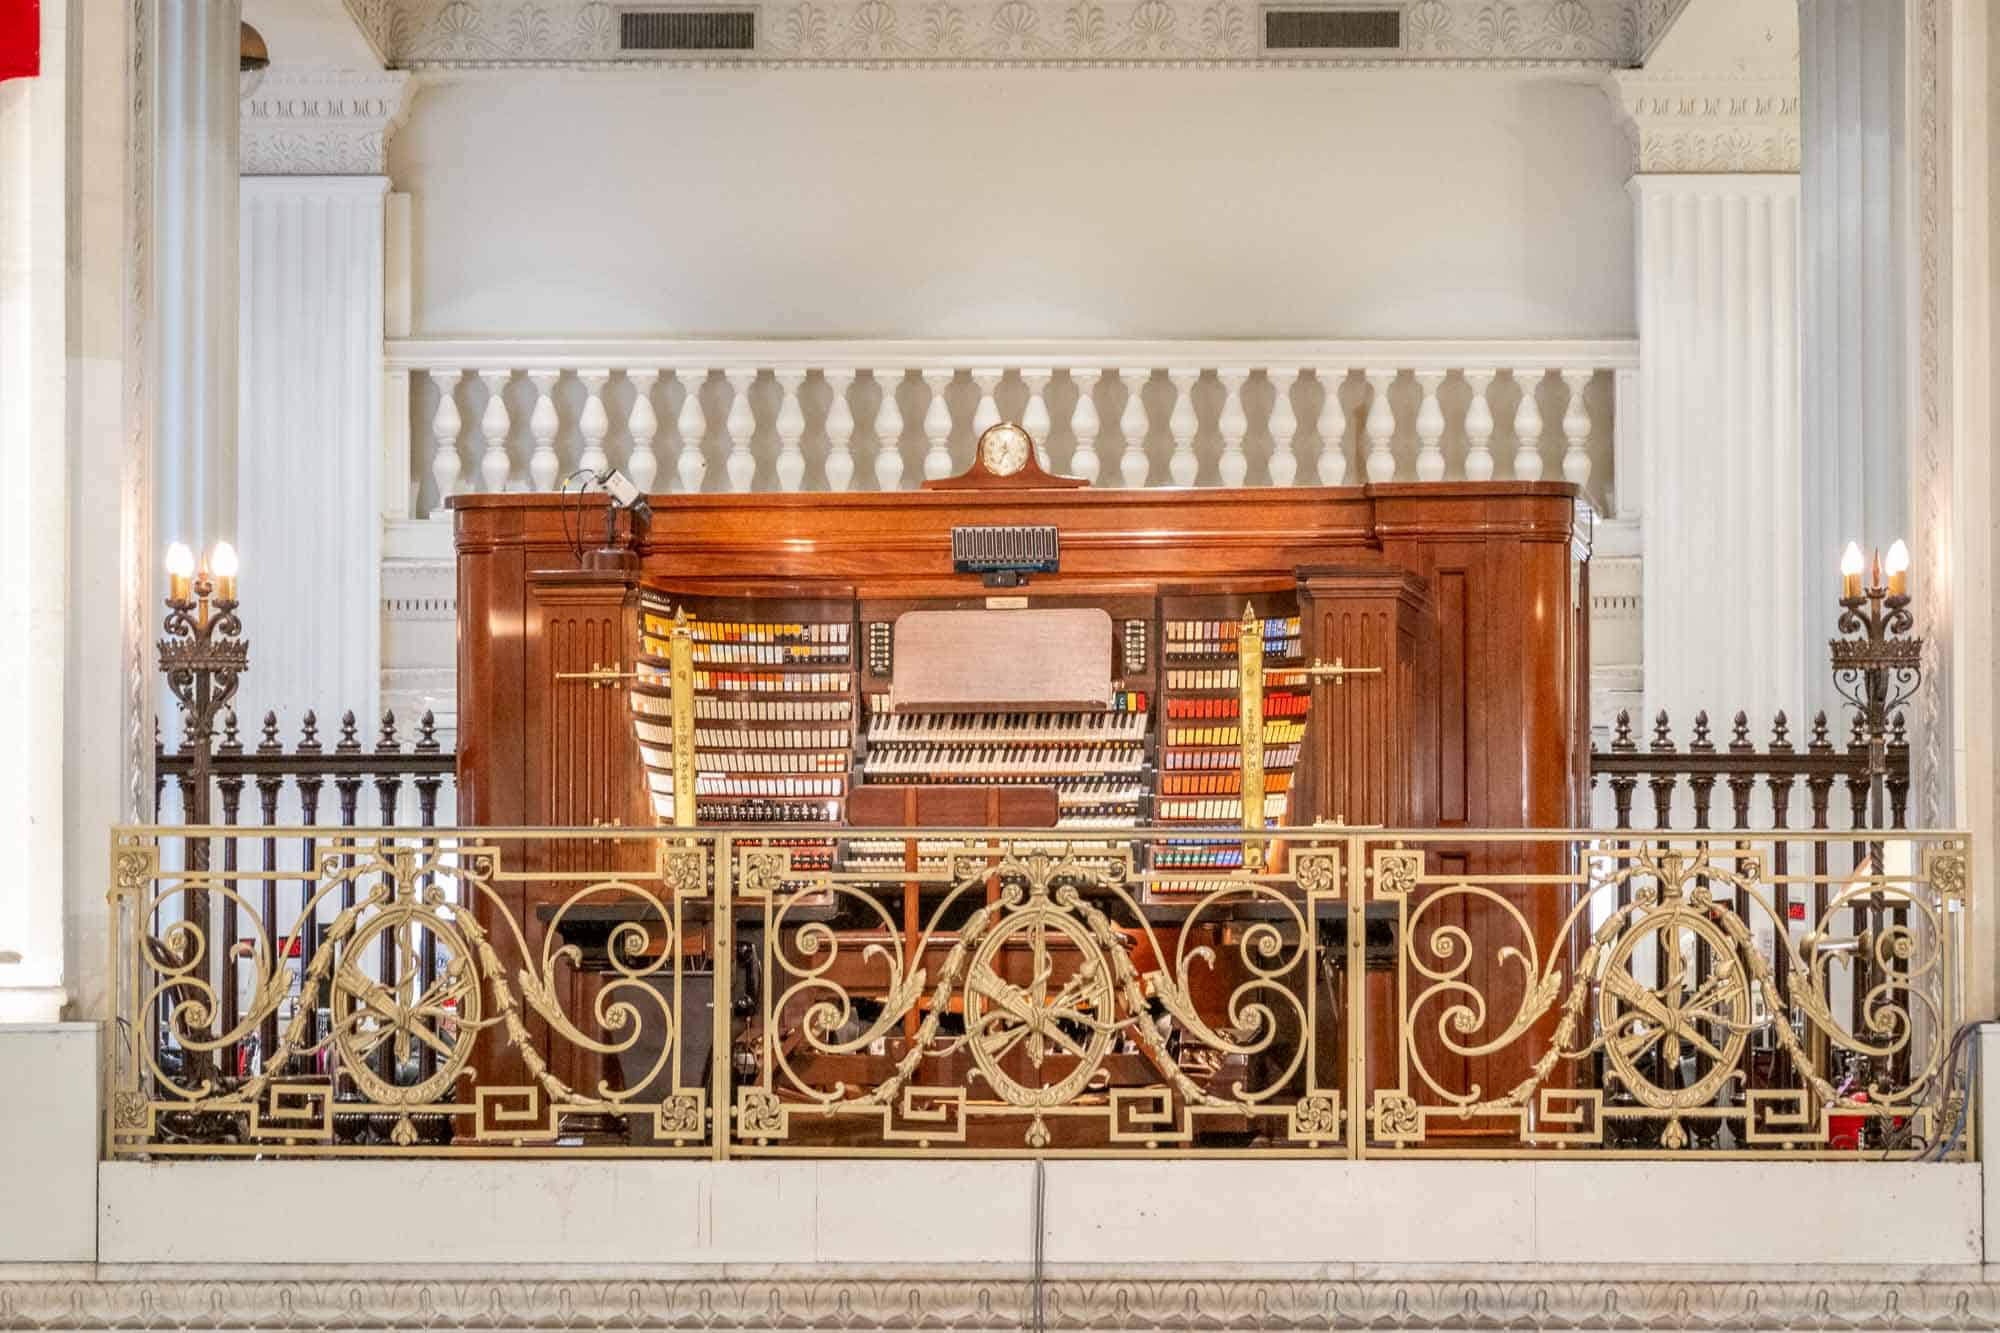 Organ console with colored keys behind a wrought iron railing